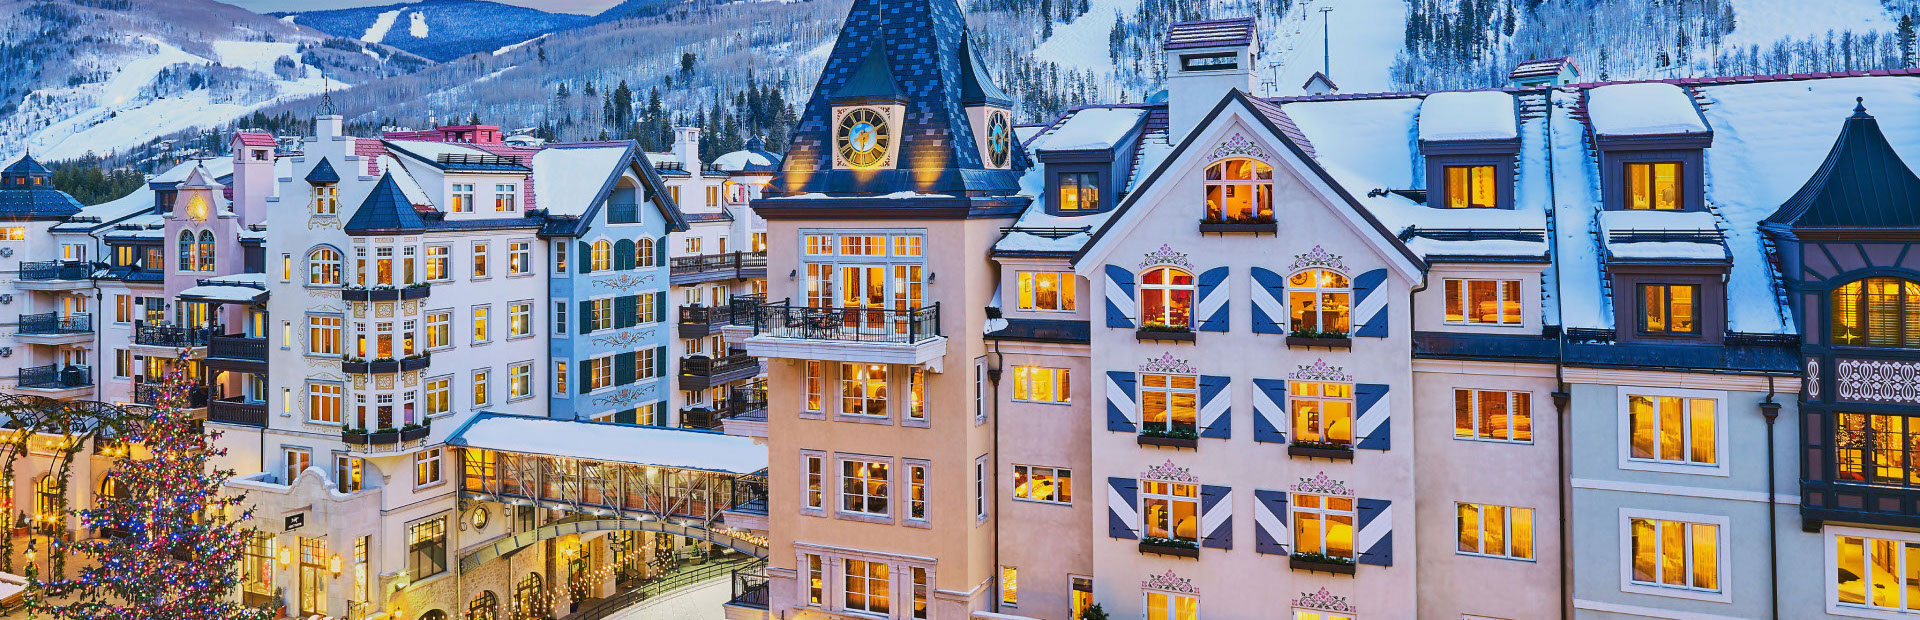 Vail Village buildings lit up at dusk with snowy mountains in the background